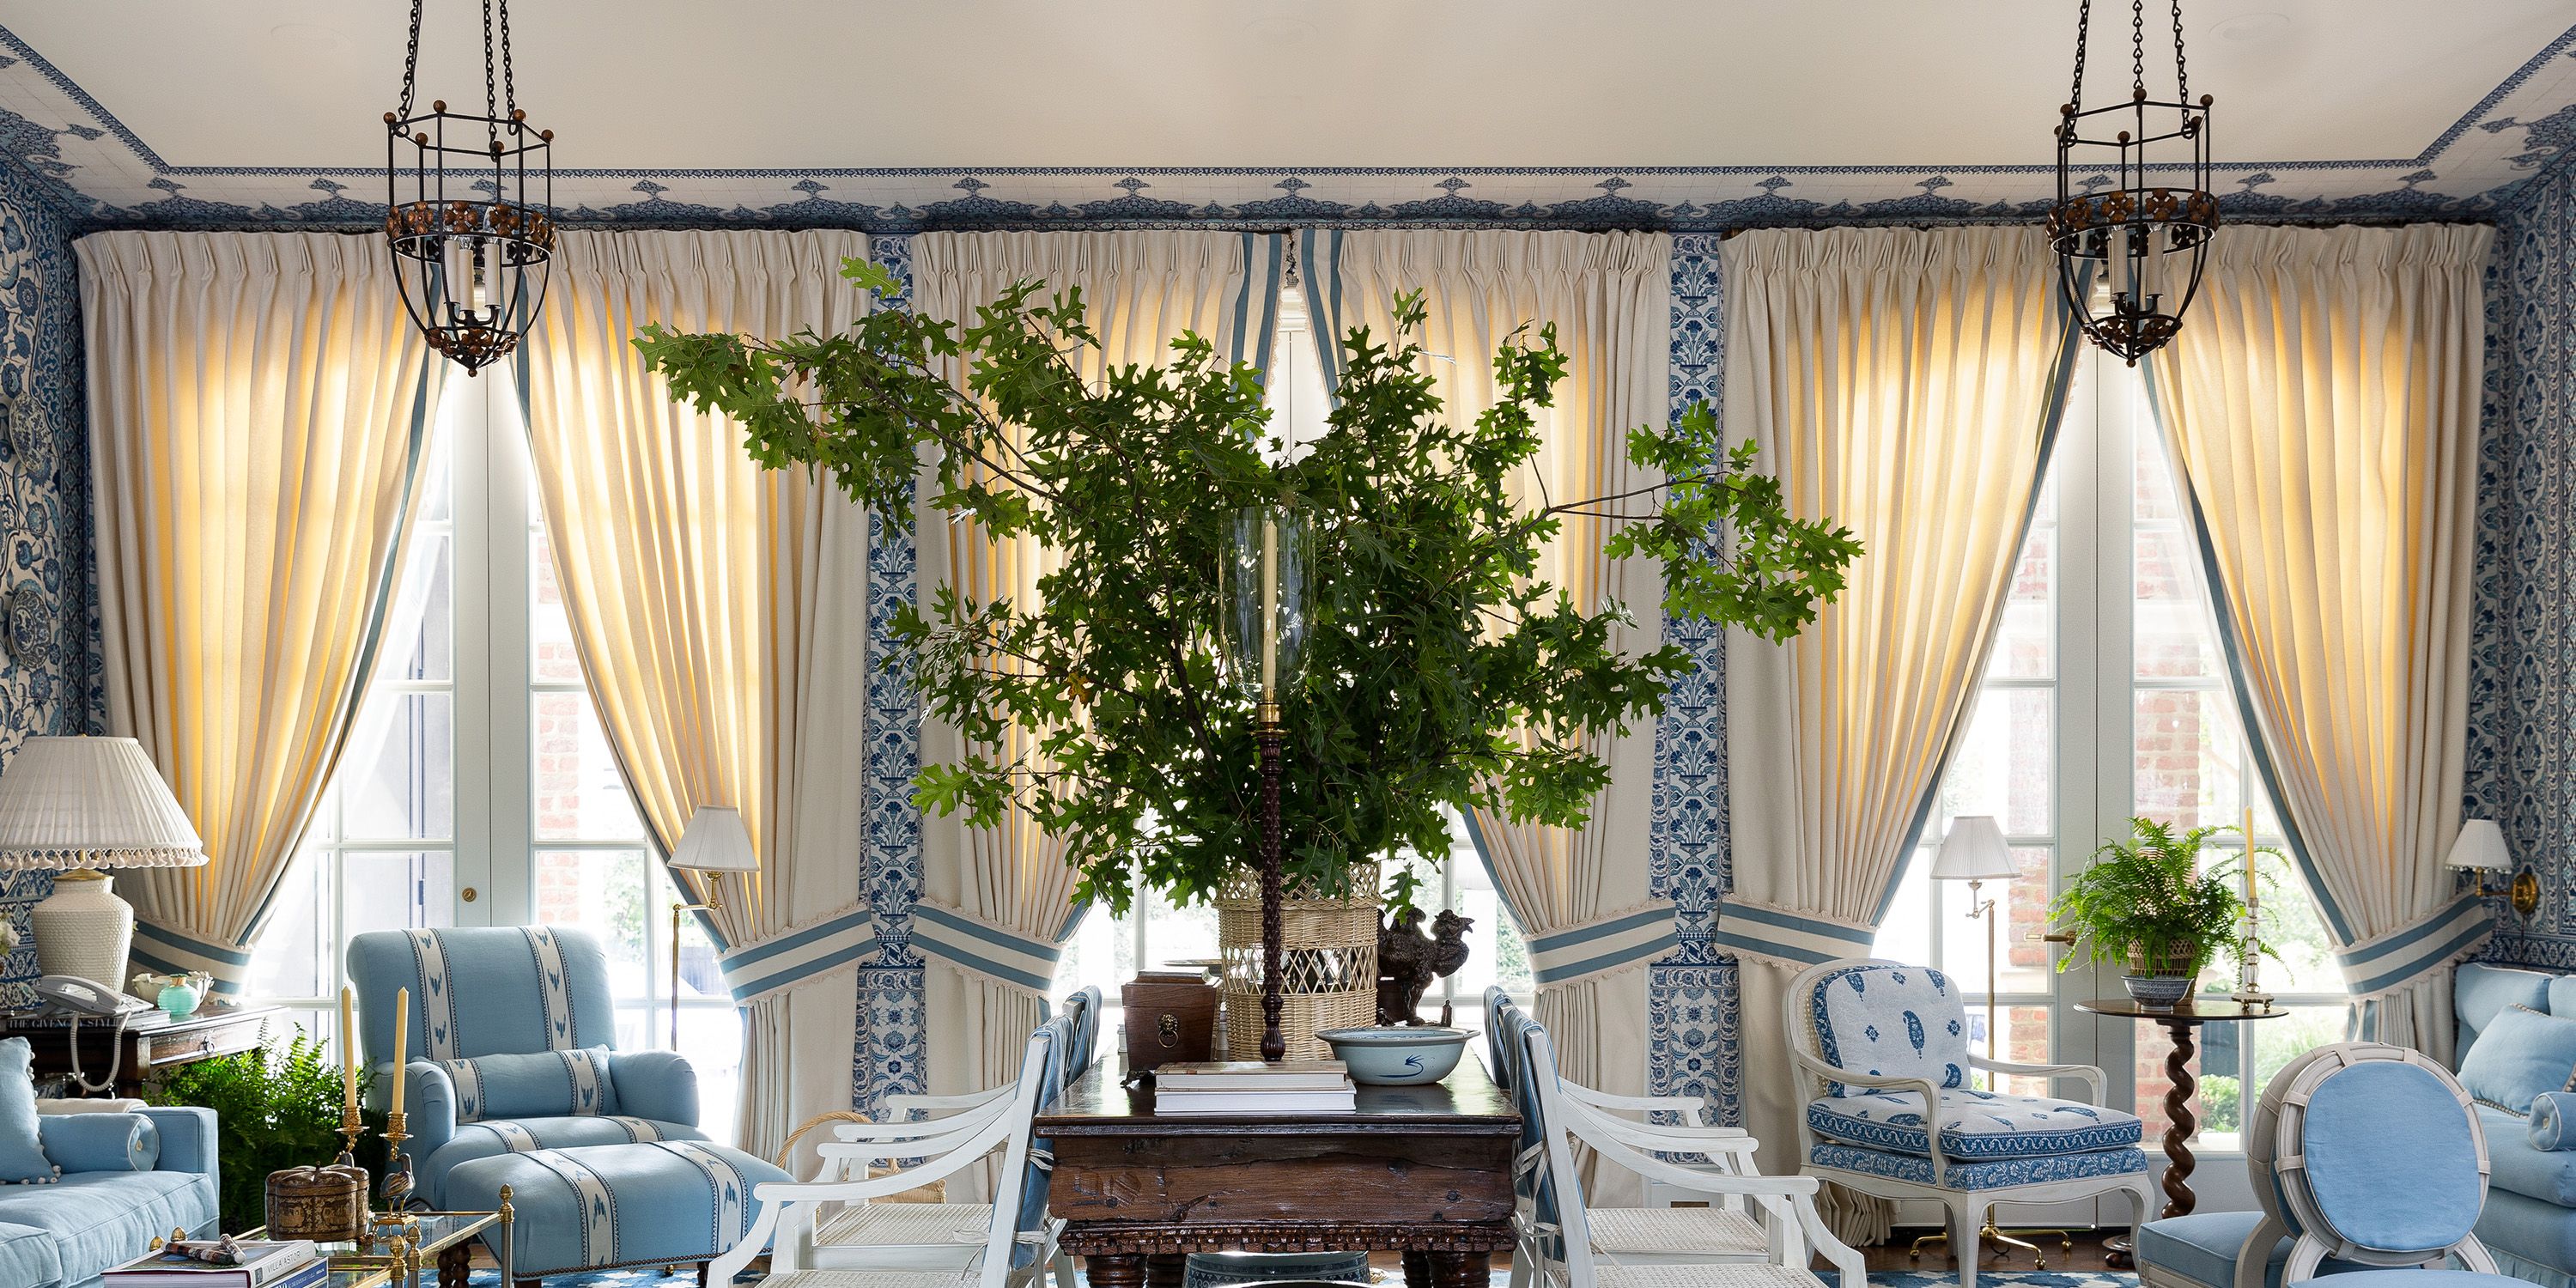 How do you decorate with cerulean blue